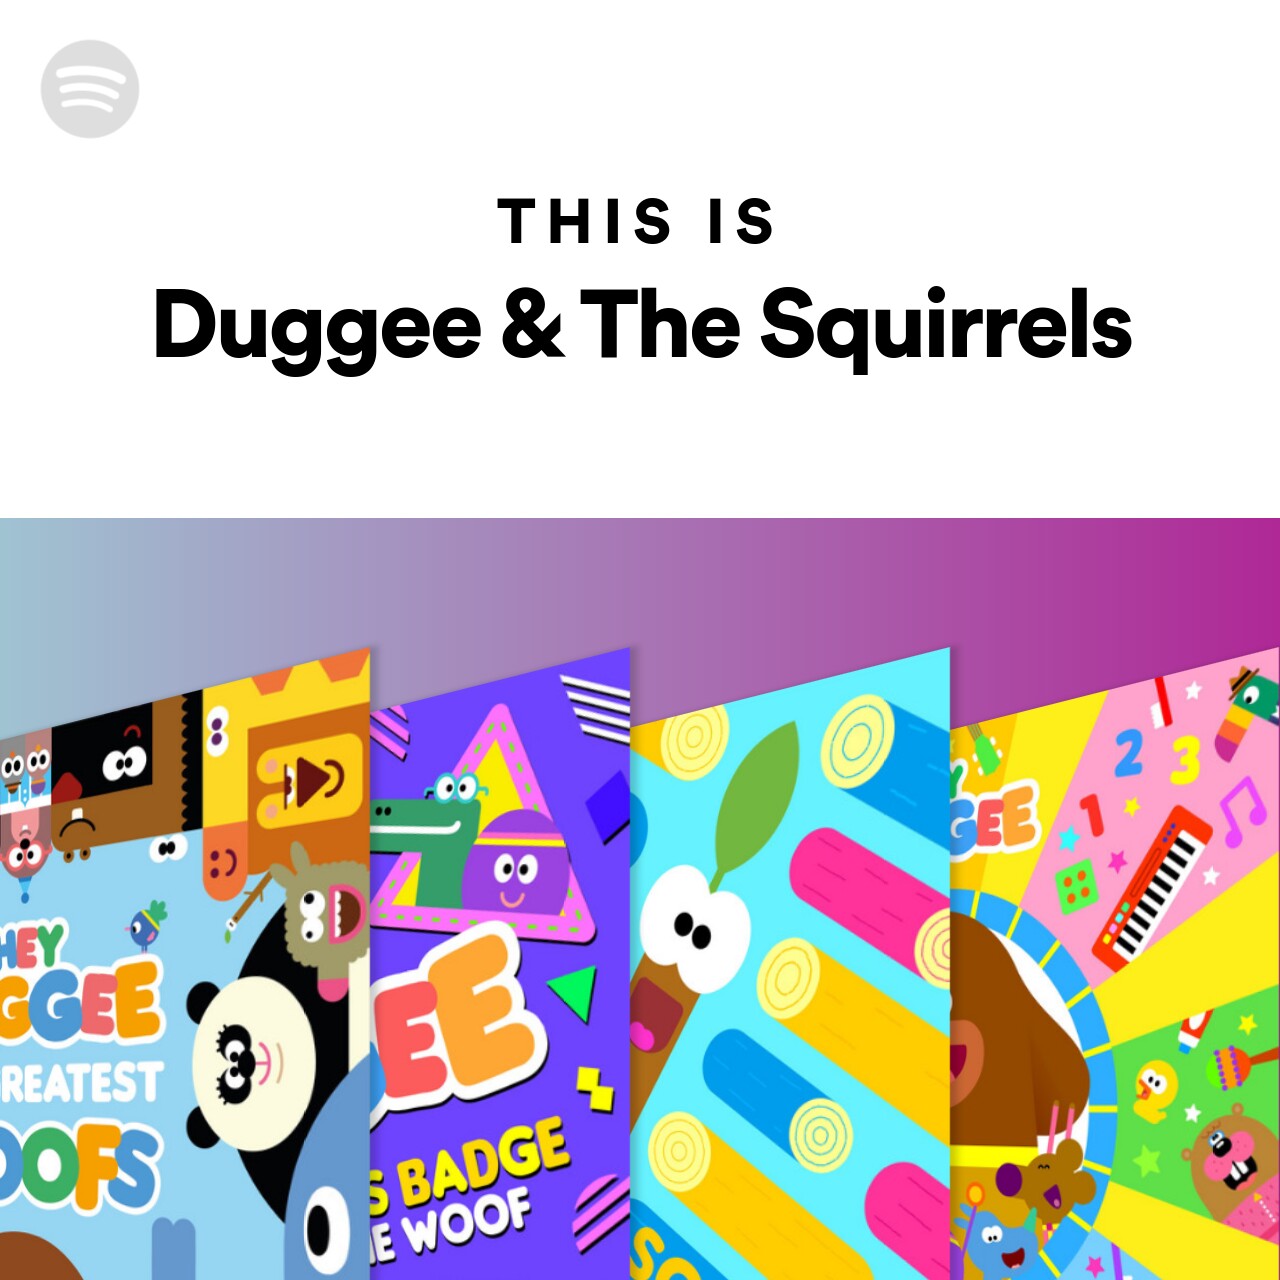 This Is Duggee & The Squirrels